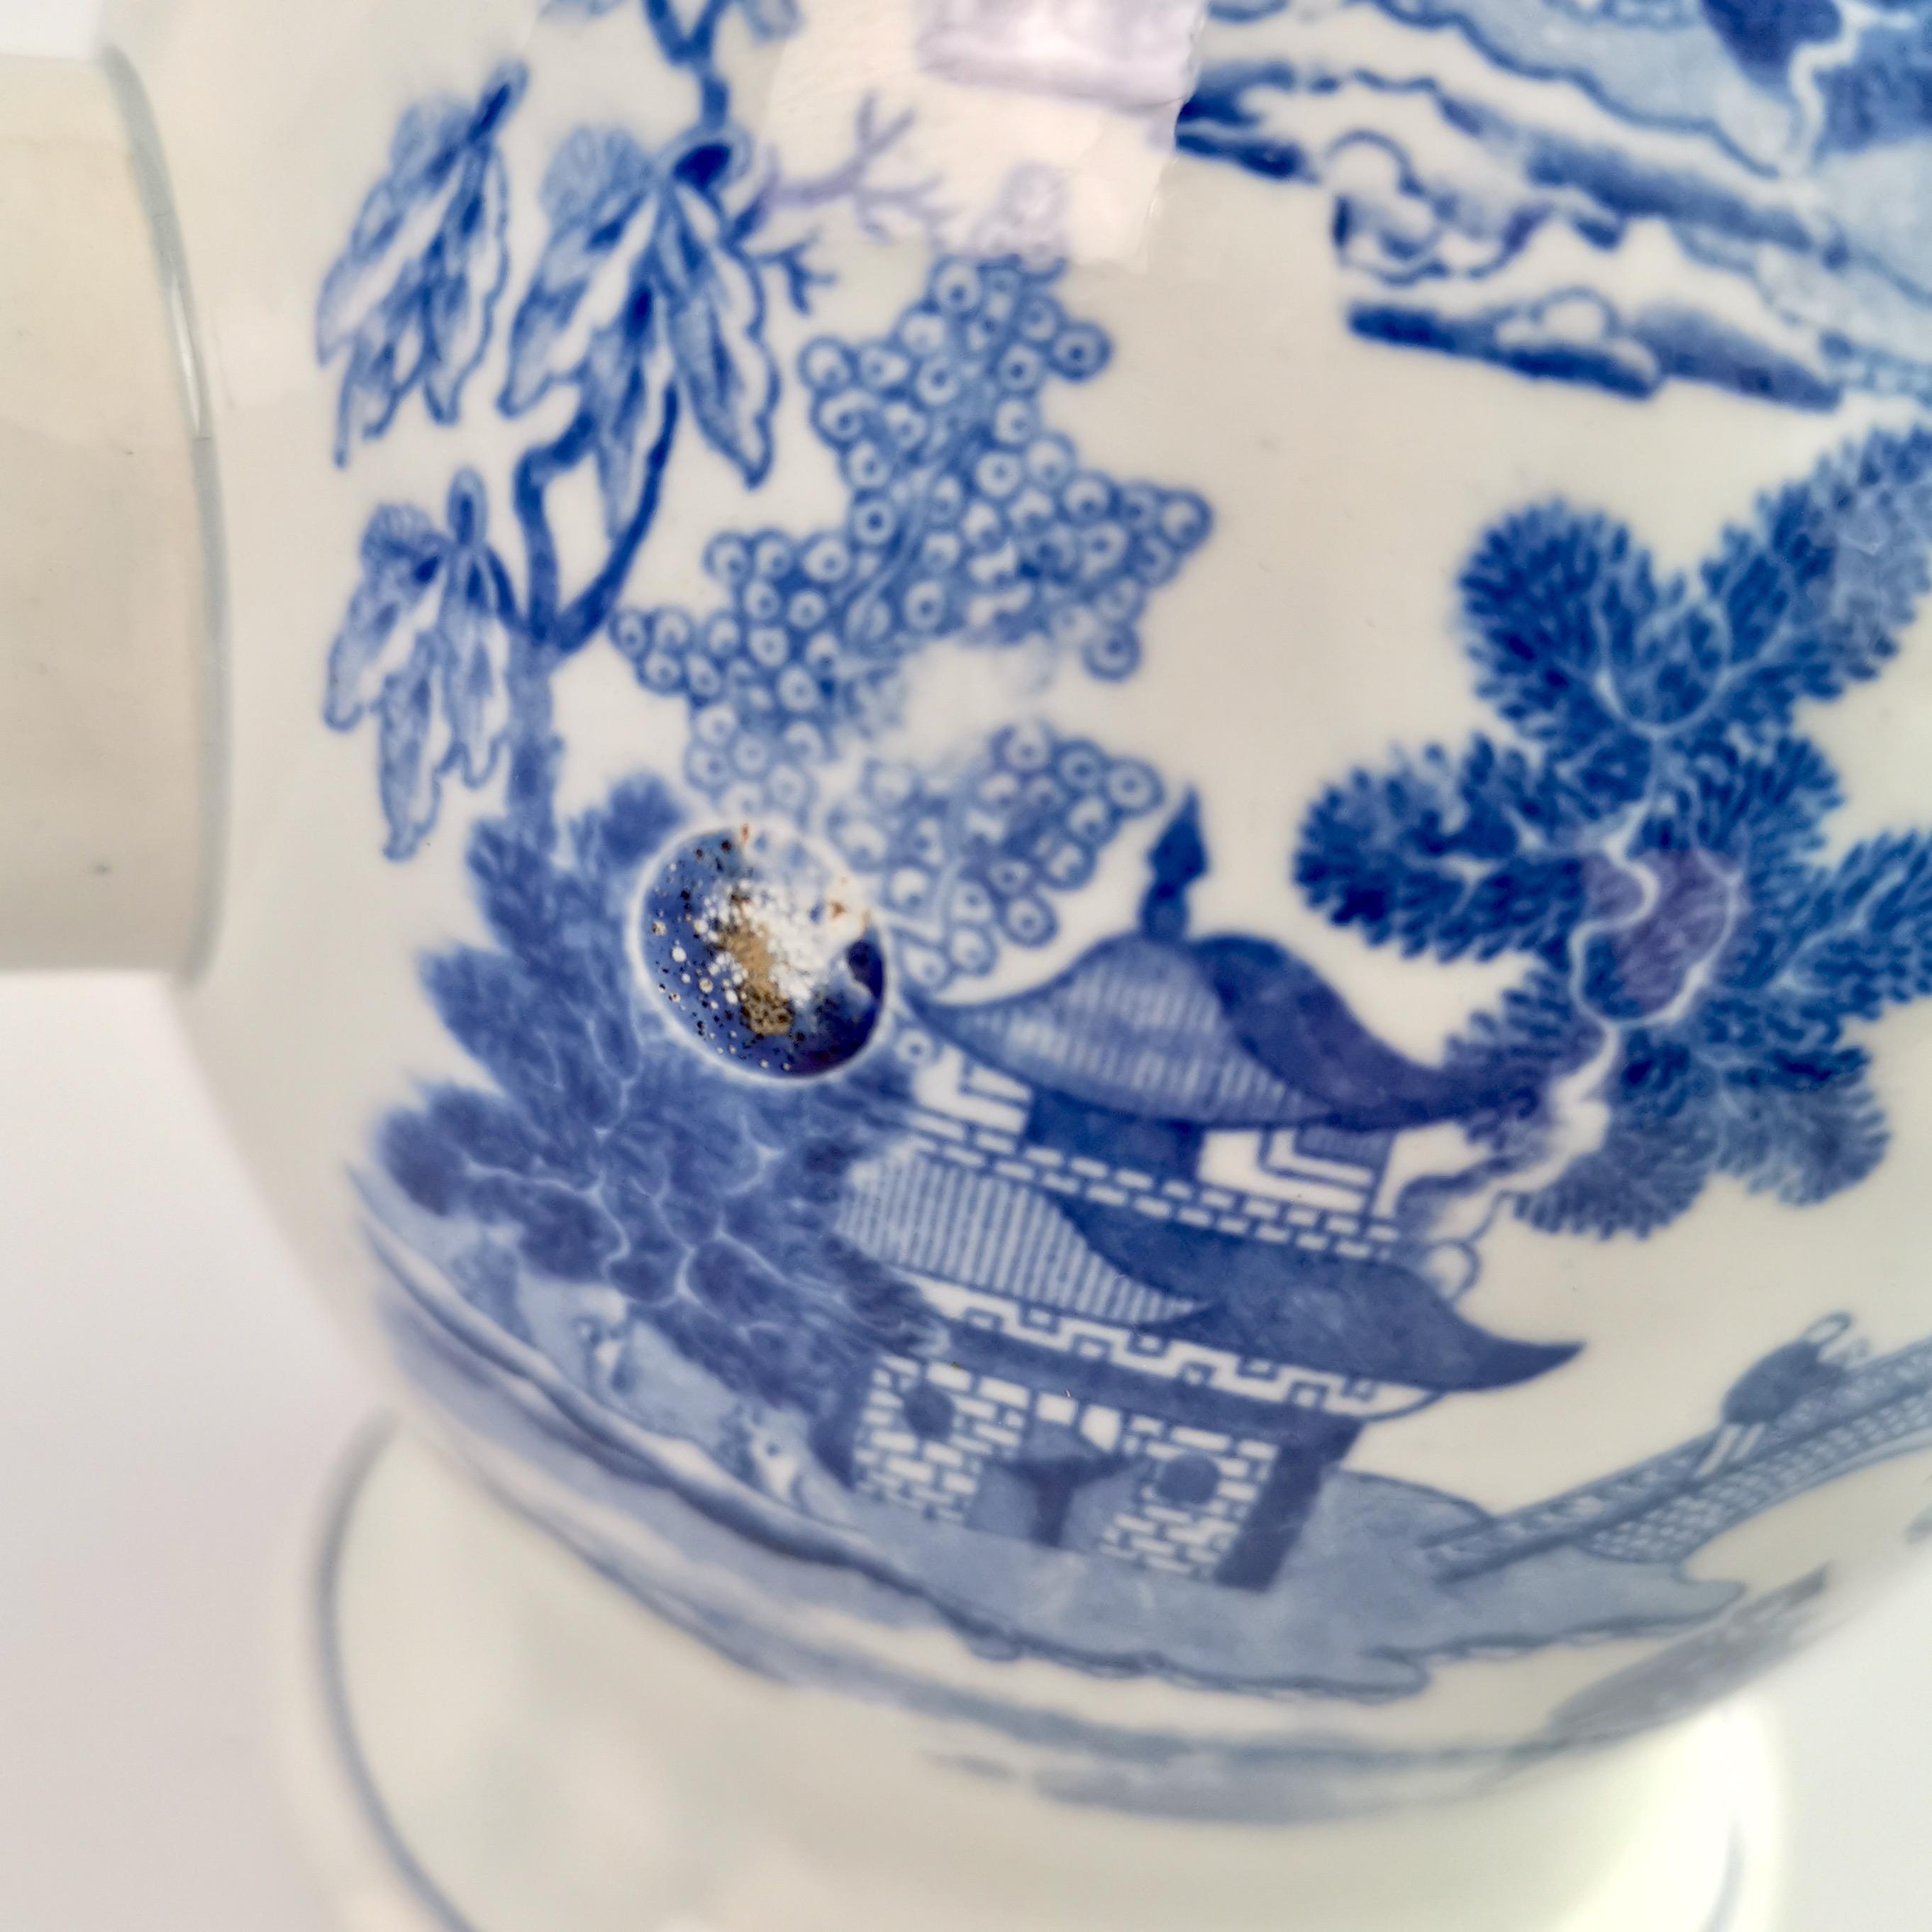 Rathbone Pearlware Coffee Pot, Pagoda Pattern Blue and White, ca 1815 9